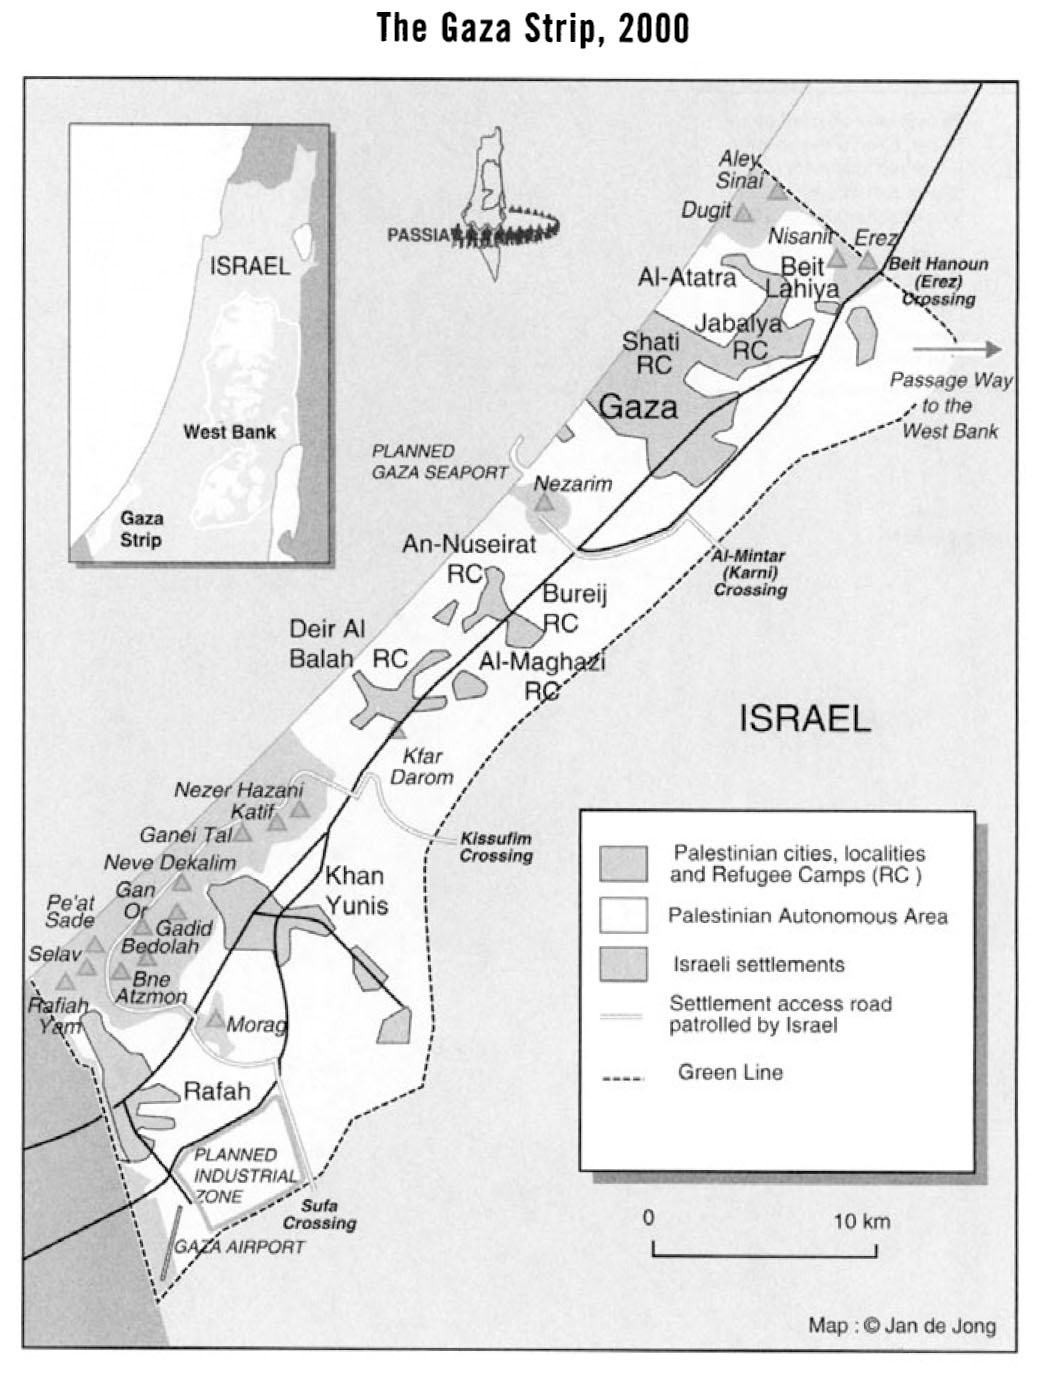 The truth about Camp David the untold story about the collapse of the Middle East peace process - photo 12